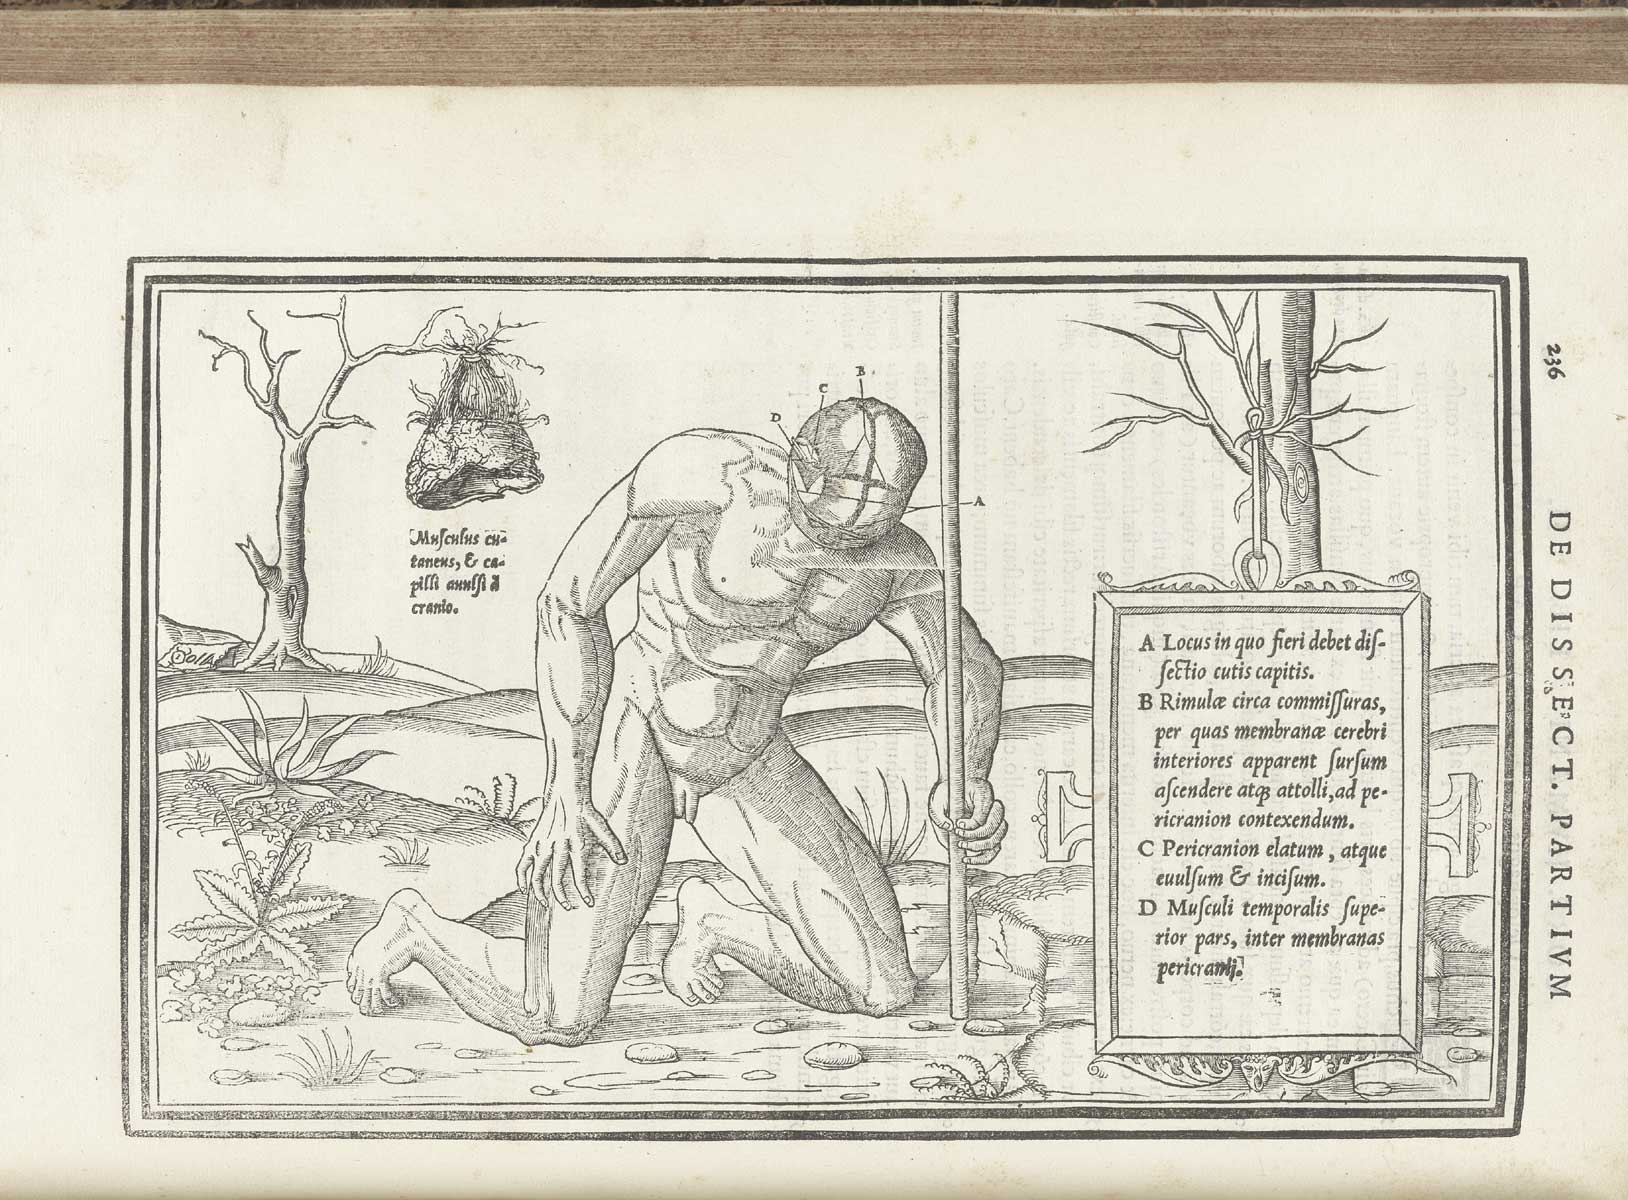 Woodcut of nude male figure in a pastoral setting on his knees propping himself up with a wooden staff using his left hand, facing downward giving a view of the top of his head with scalp removed to show the sutures of the skull, while in the background to the left hangs his scalp from the branch of a naked tree by the hair; on the right is a tablet naming the structures in Latin; from Charles Estienne’s De dissection partium corporis humani libri tres, NLM Call no.: WZ 240 E81dd 1545.